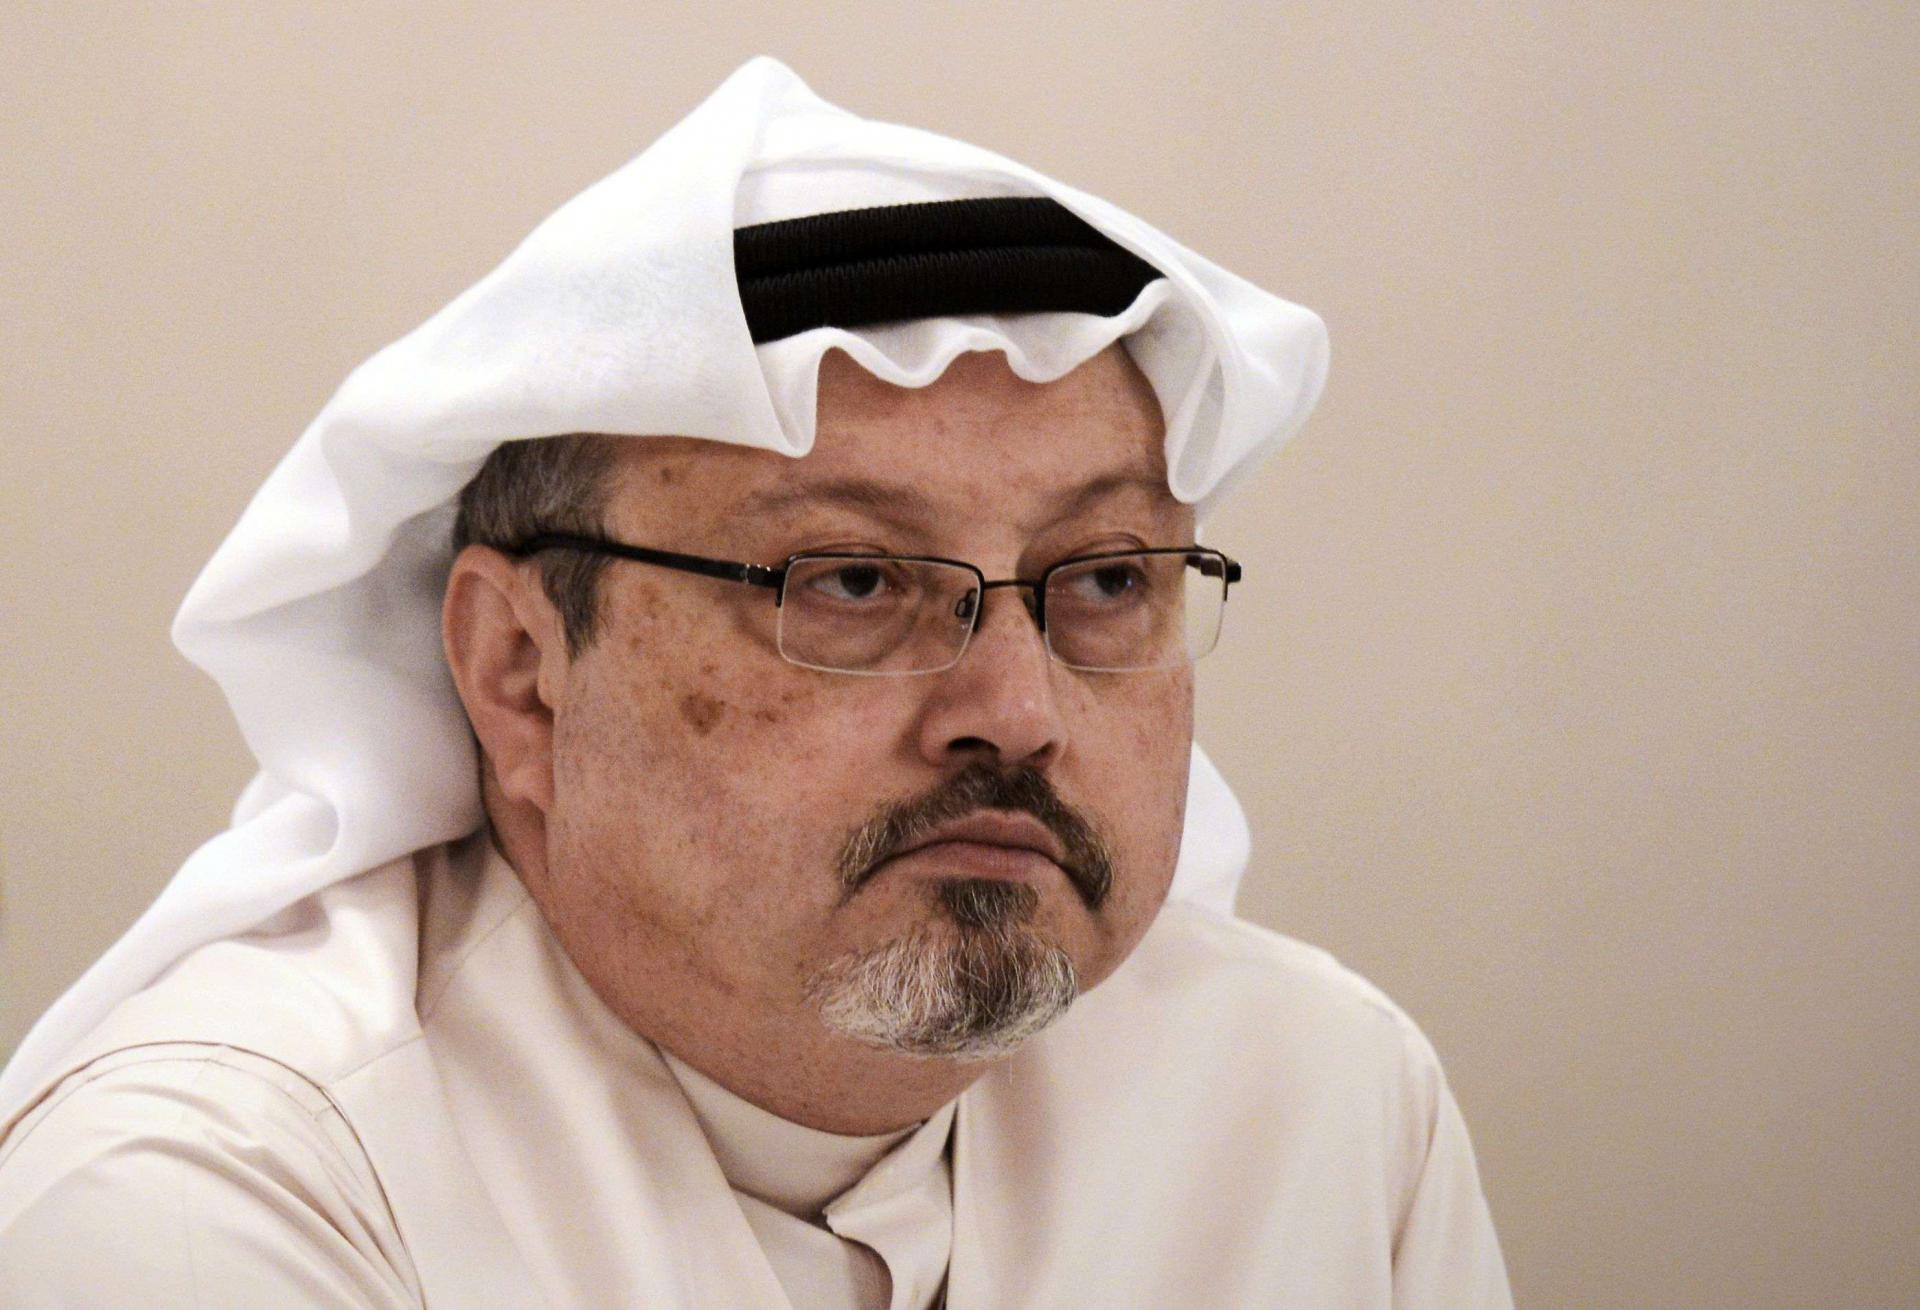 Khashoggi's family, who are permitted to attend the trial, have rejected reports of a settlement with the Saudi government